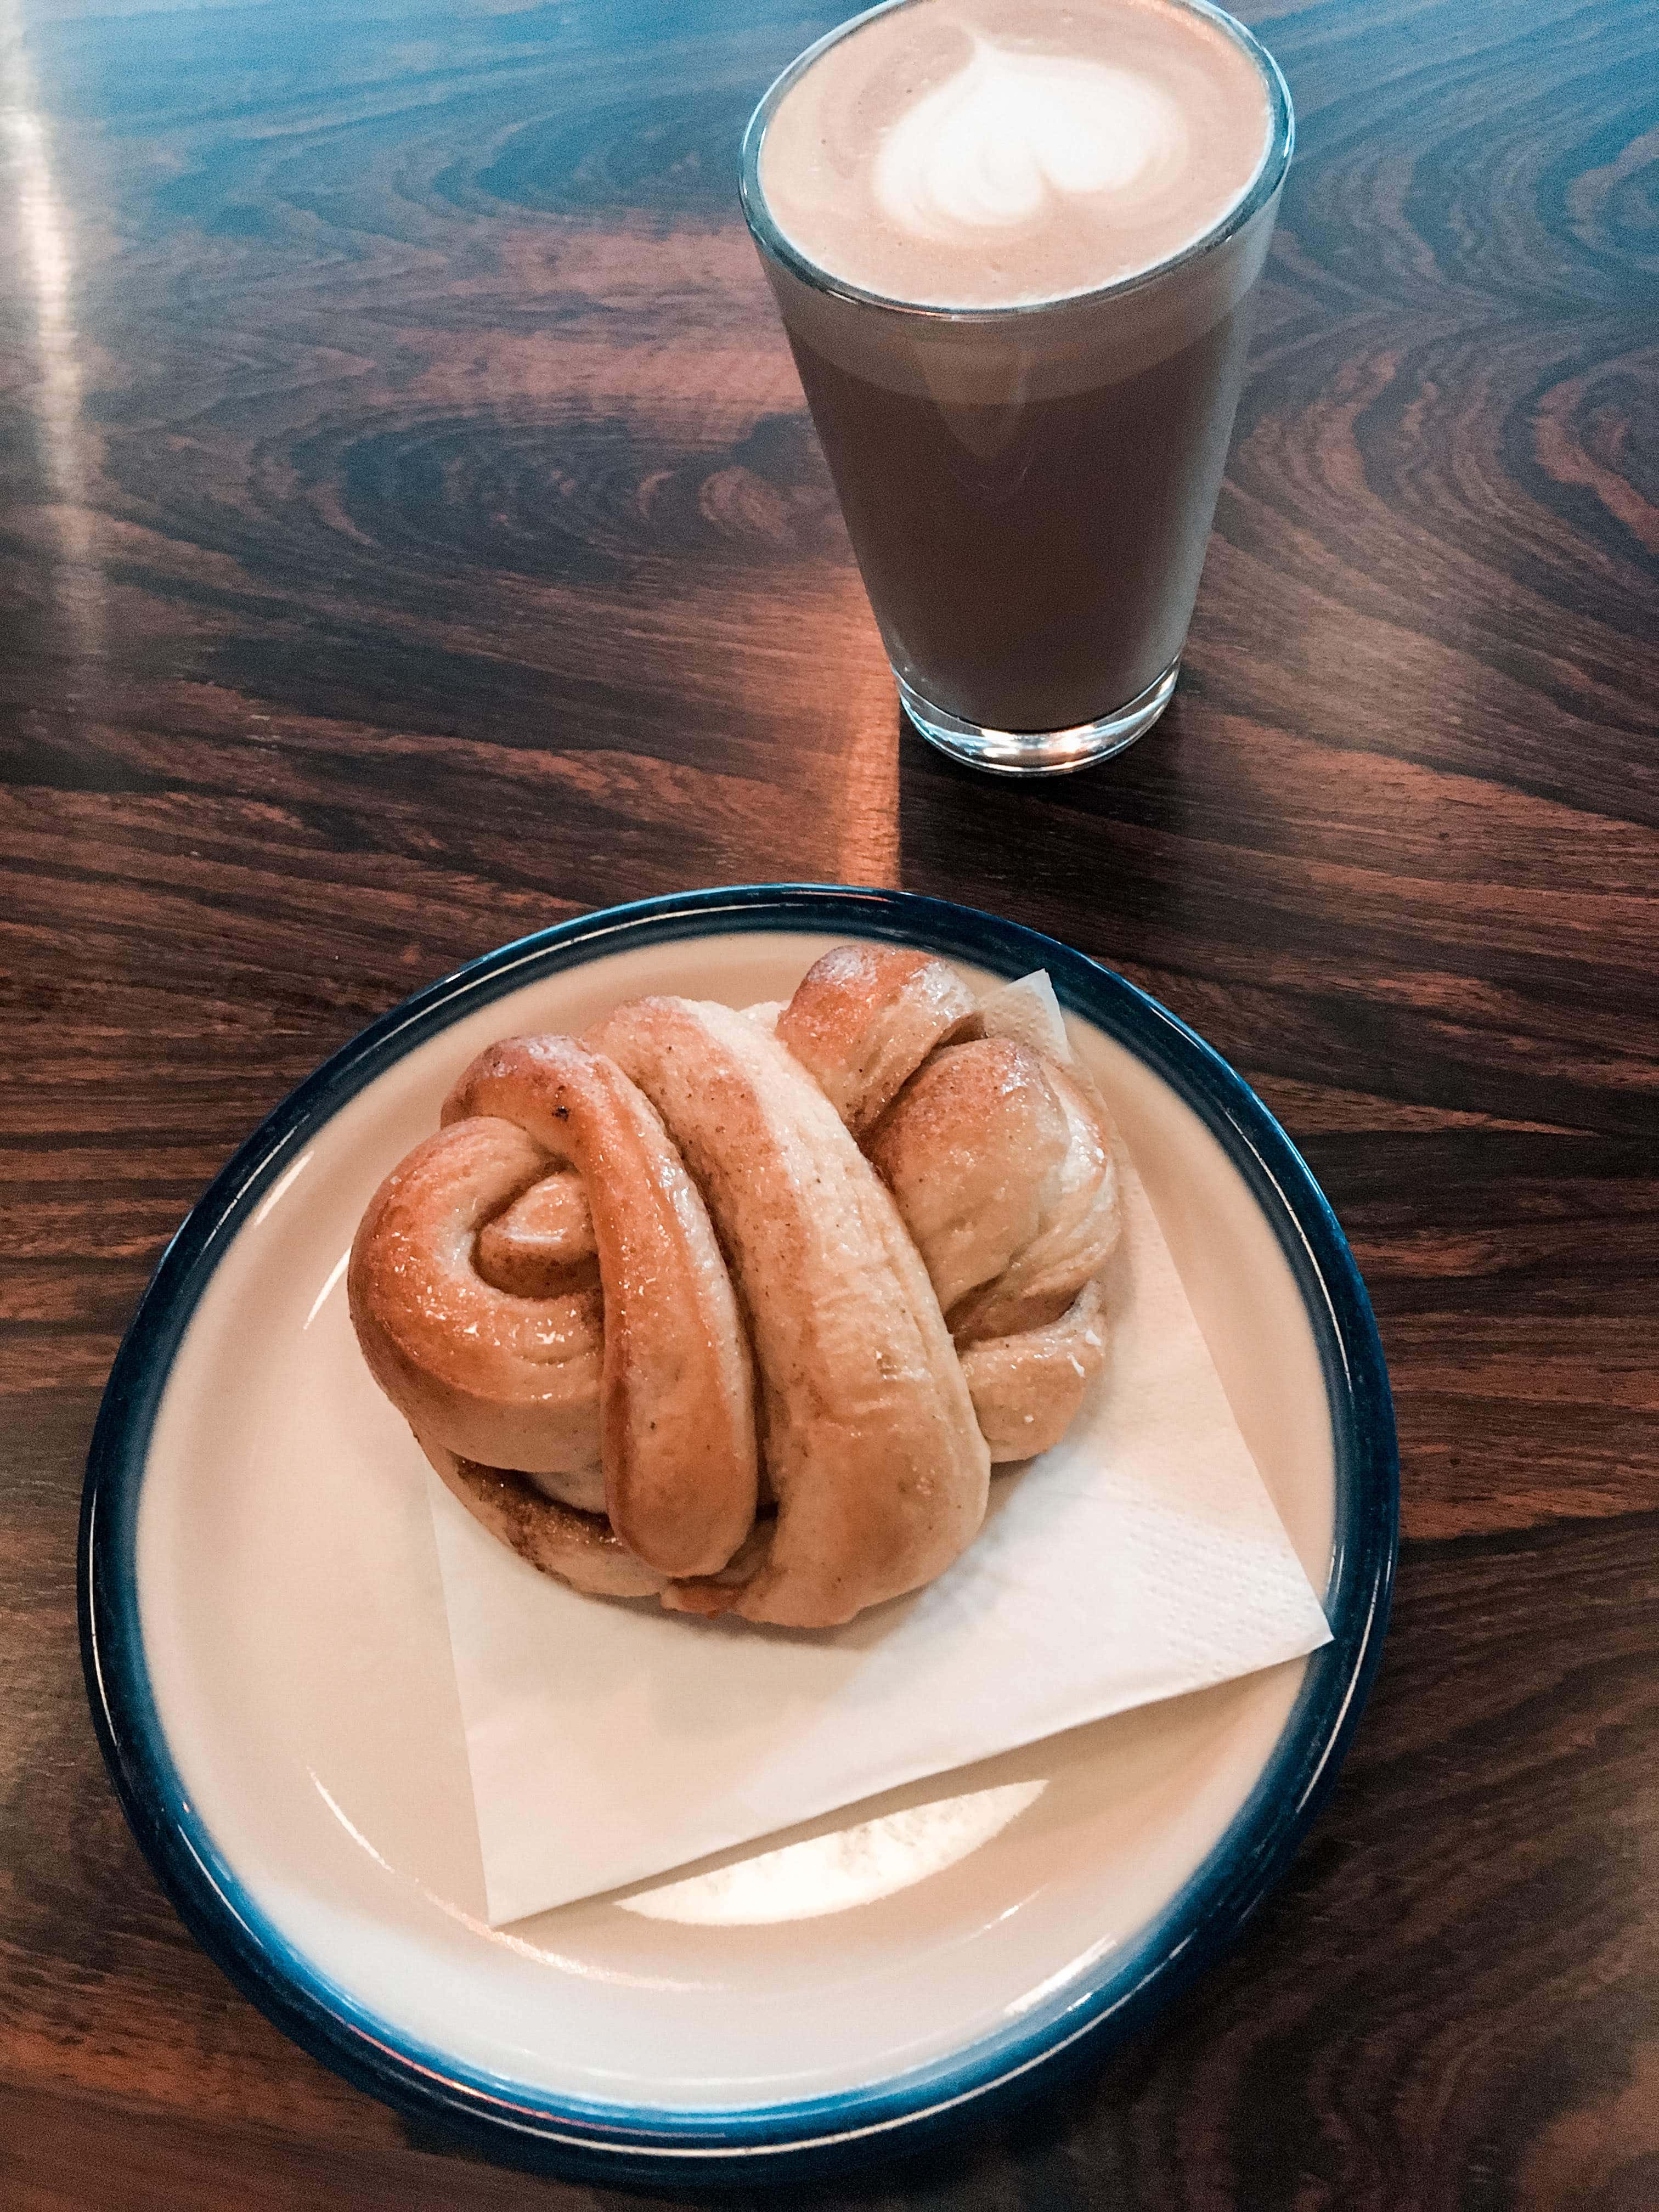 Latte and cinnamon bun at a cafe in Oslo Norway